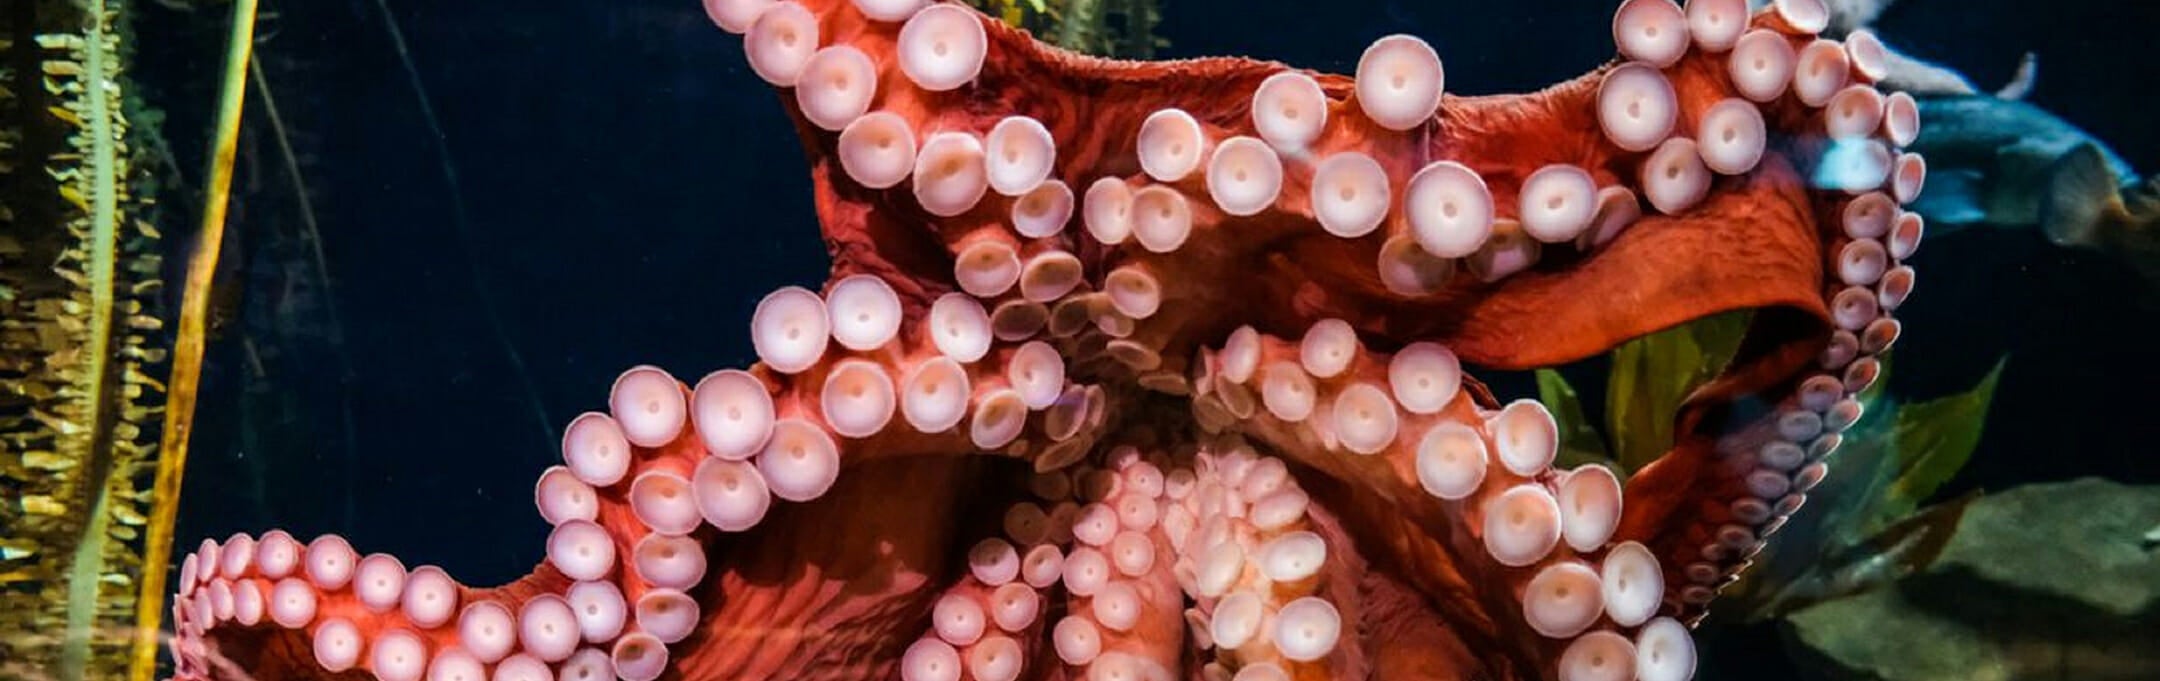 giant-pacific-octopus